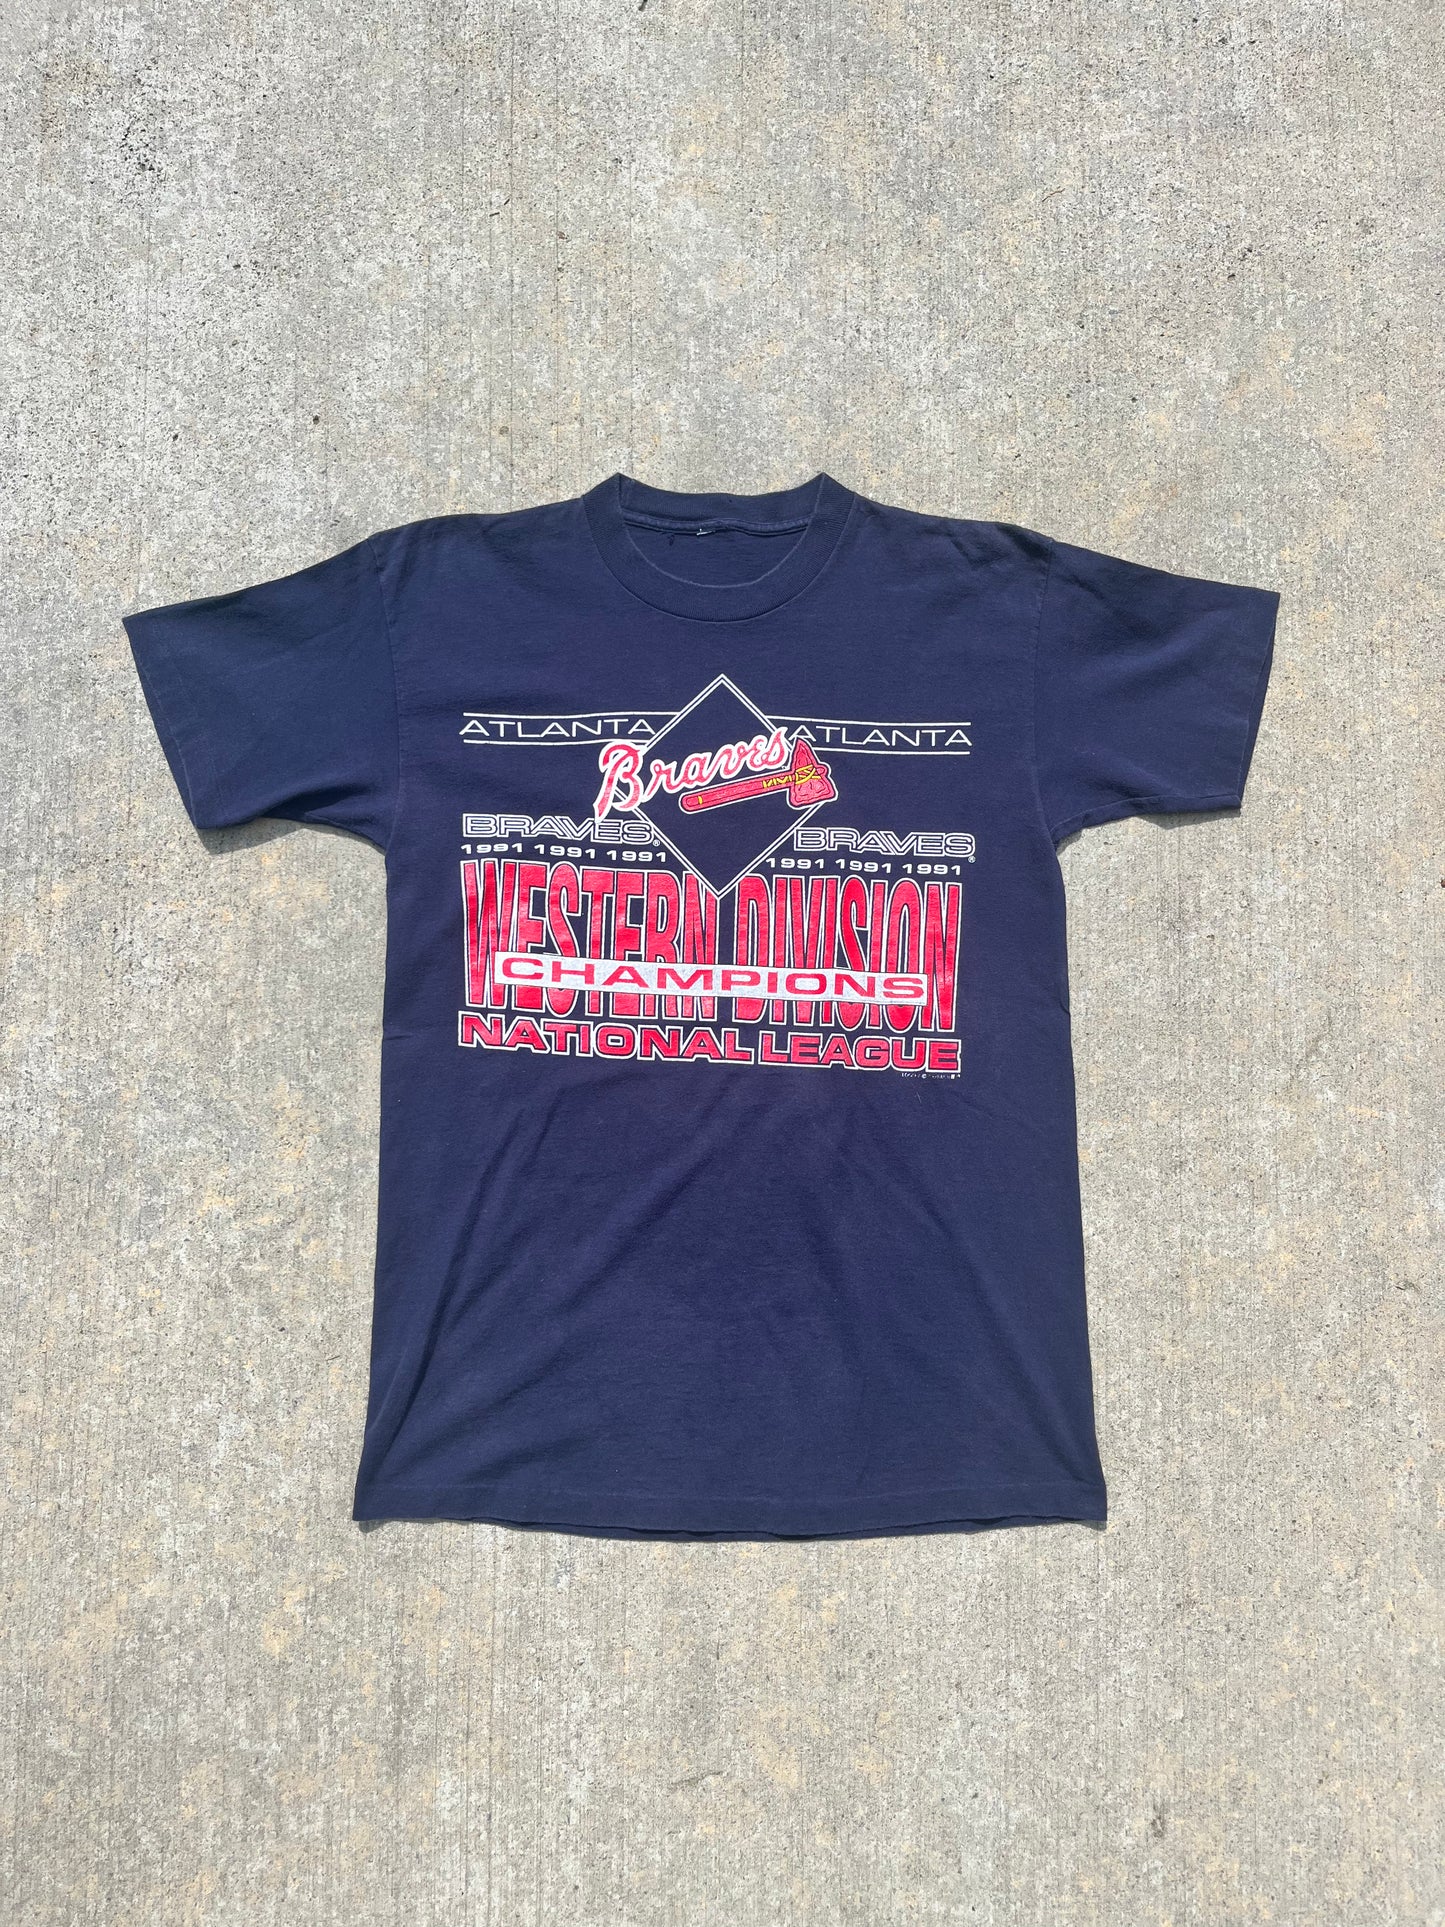 91' Braves Western Division Champs tee